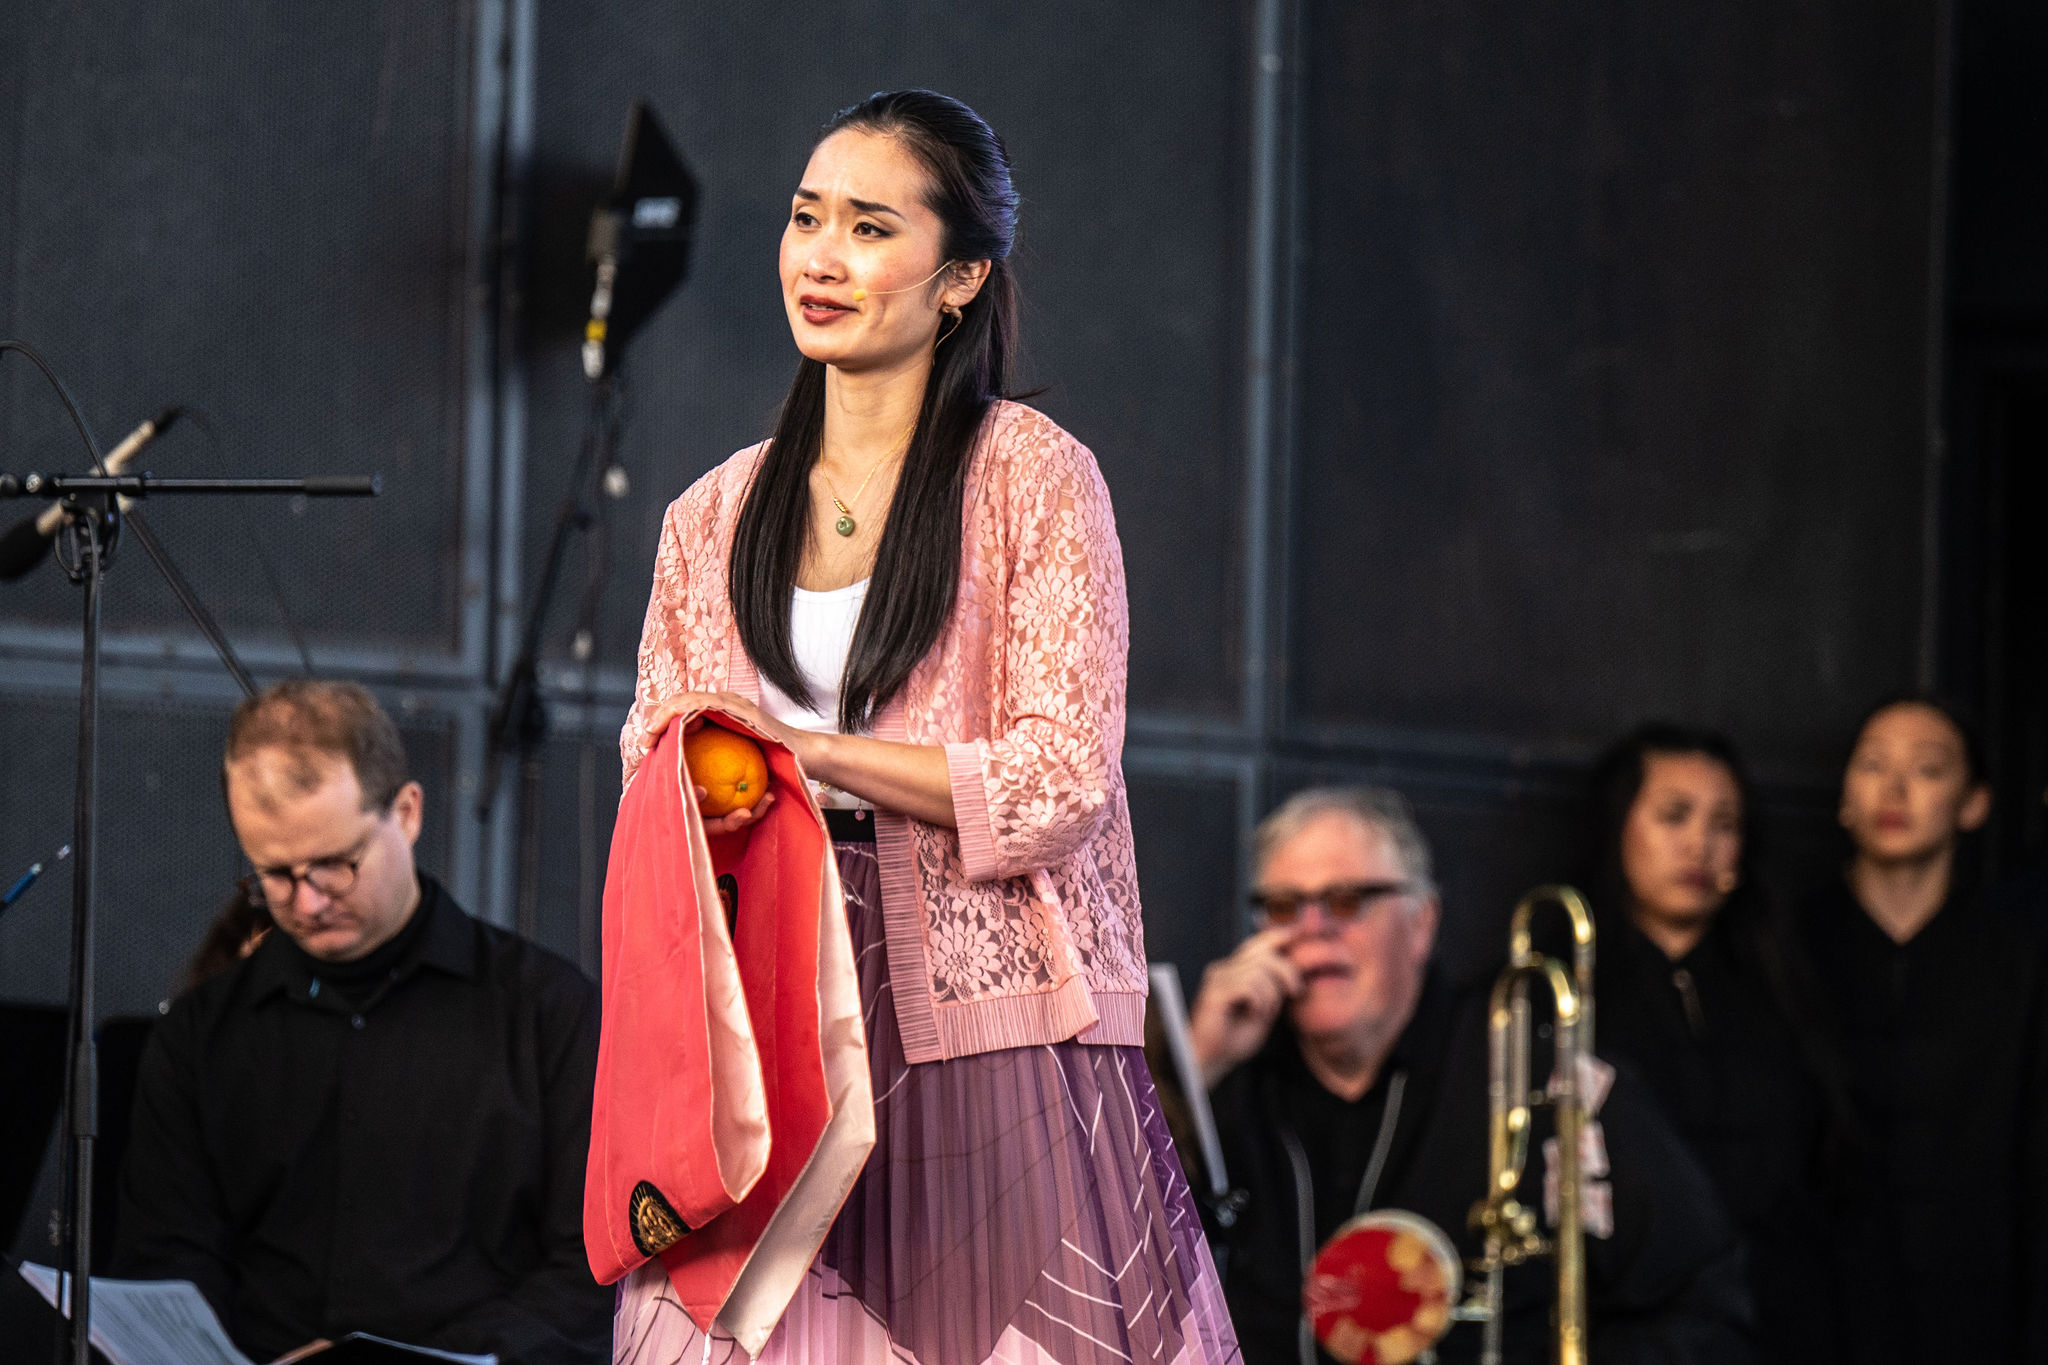 A woman stands in front of an orchestra, wearing a pink lace jacket. She holds a piece of red fabric folded over one arm, and an orange in her hand.